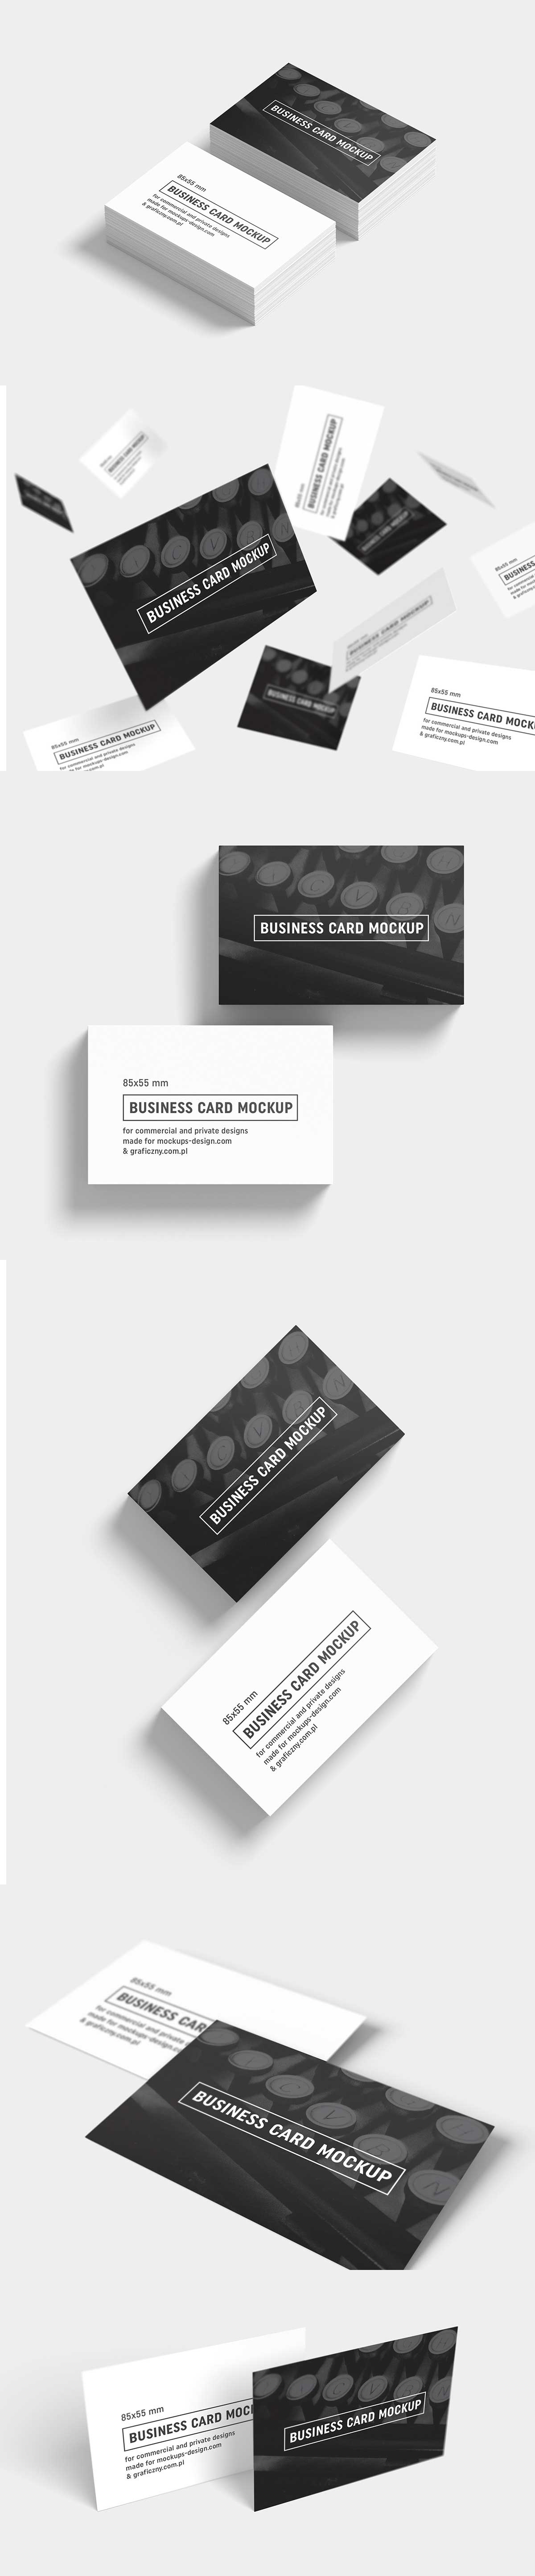 Free-Business-Cards-Mockup